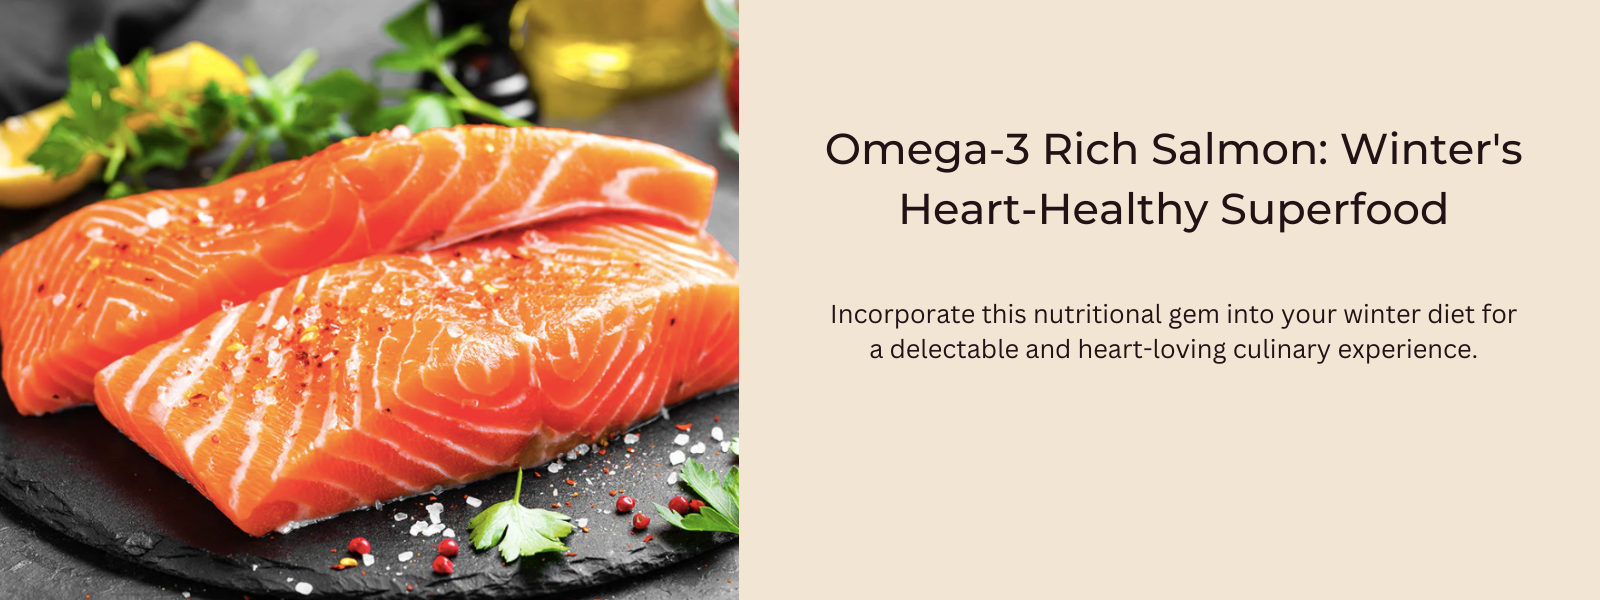 Omega-3 Rich Salmon: Winter's Heart-Healthy Superfood